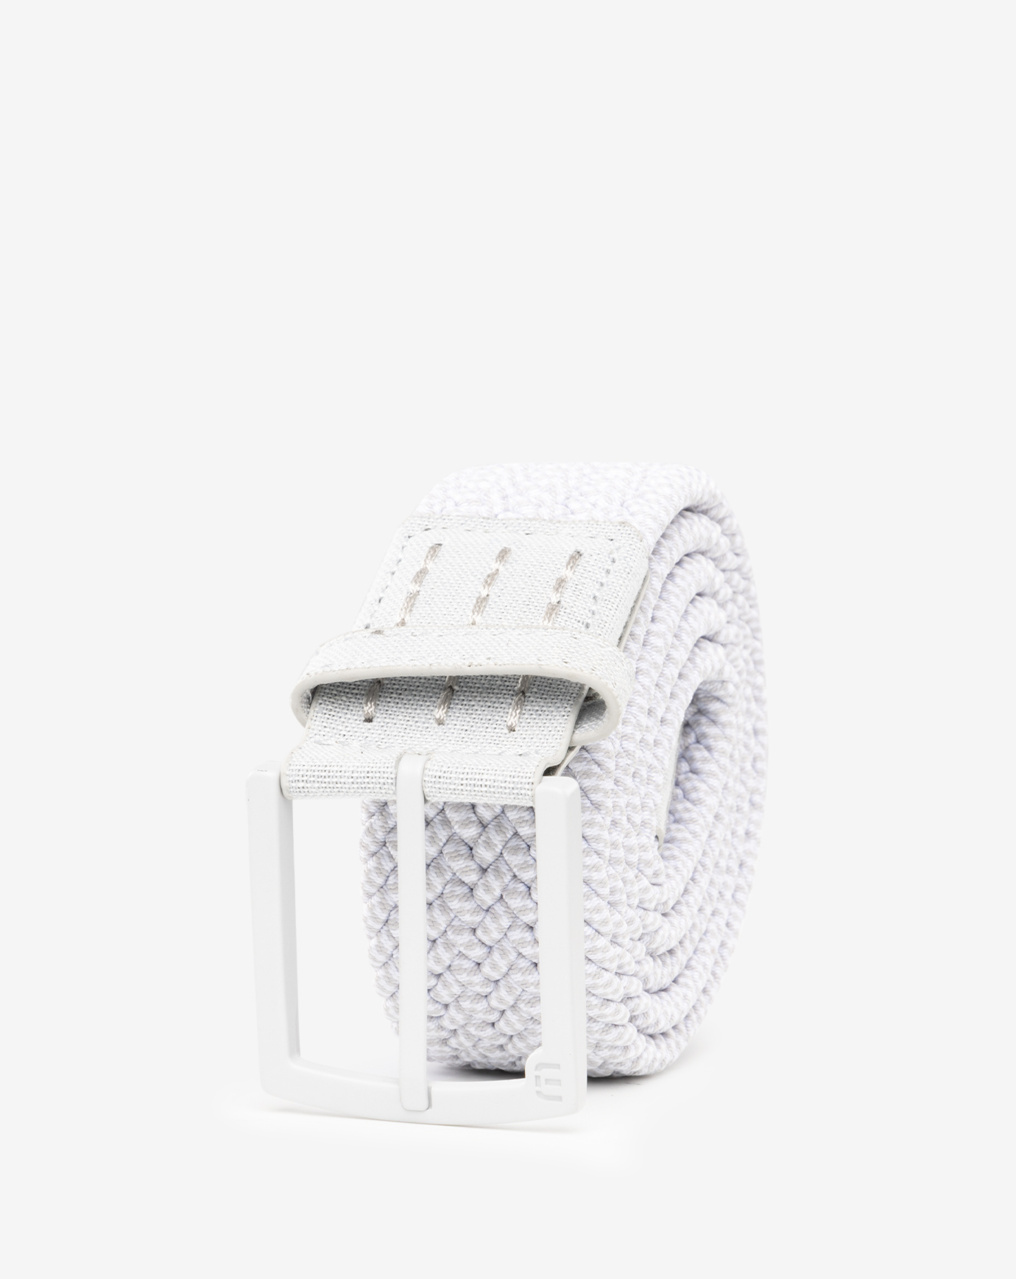 STAGGERWING 2.0 STRETCH WOVEN BELT 1